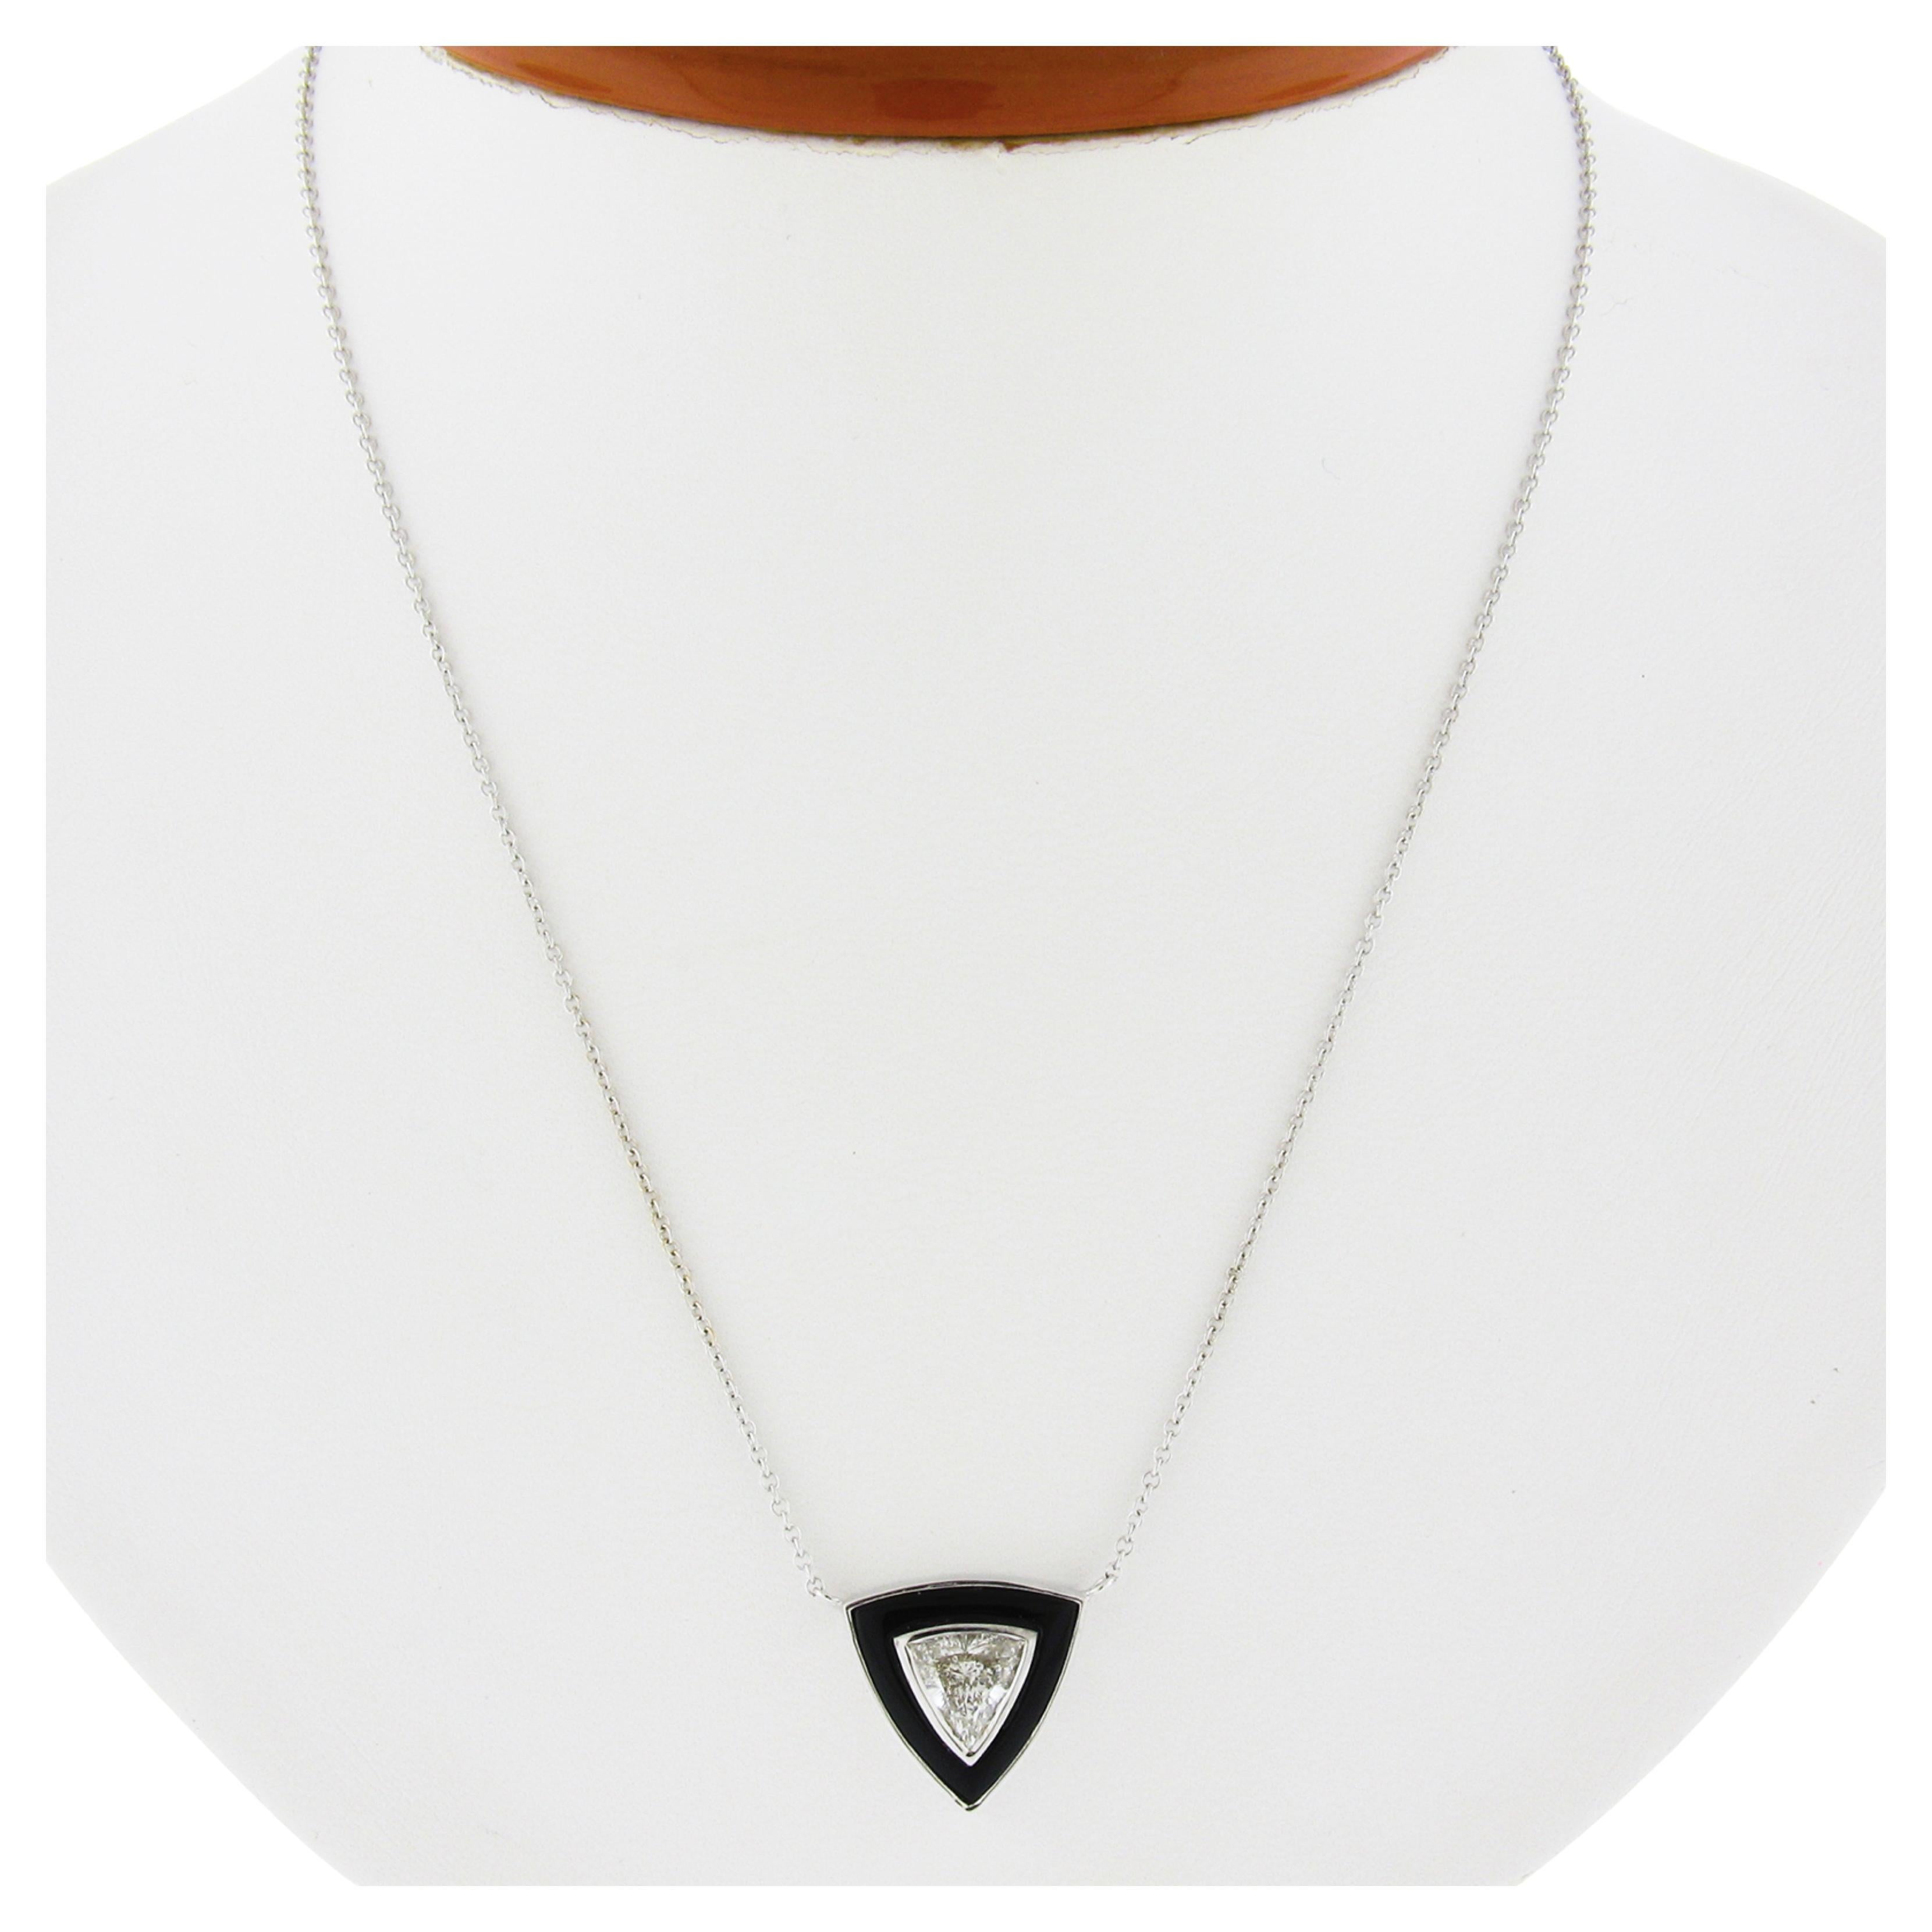 Here we have a gorgeous, brand new, and custom designed pendant necklace crafted in solid 18k white gold. The triangular shaped pendant features a fine, GIA certified, trillion cut diamond solitaire neatly bezel set at the center, and further